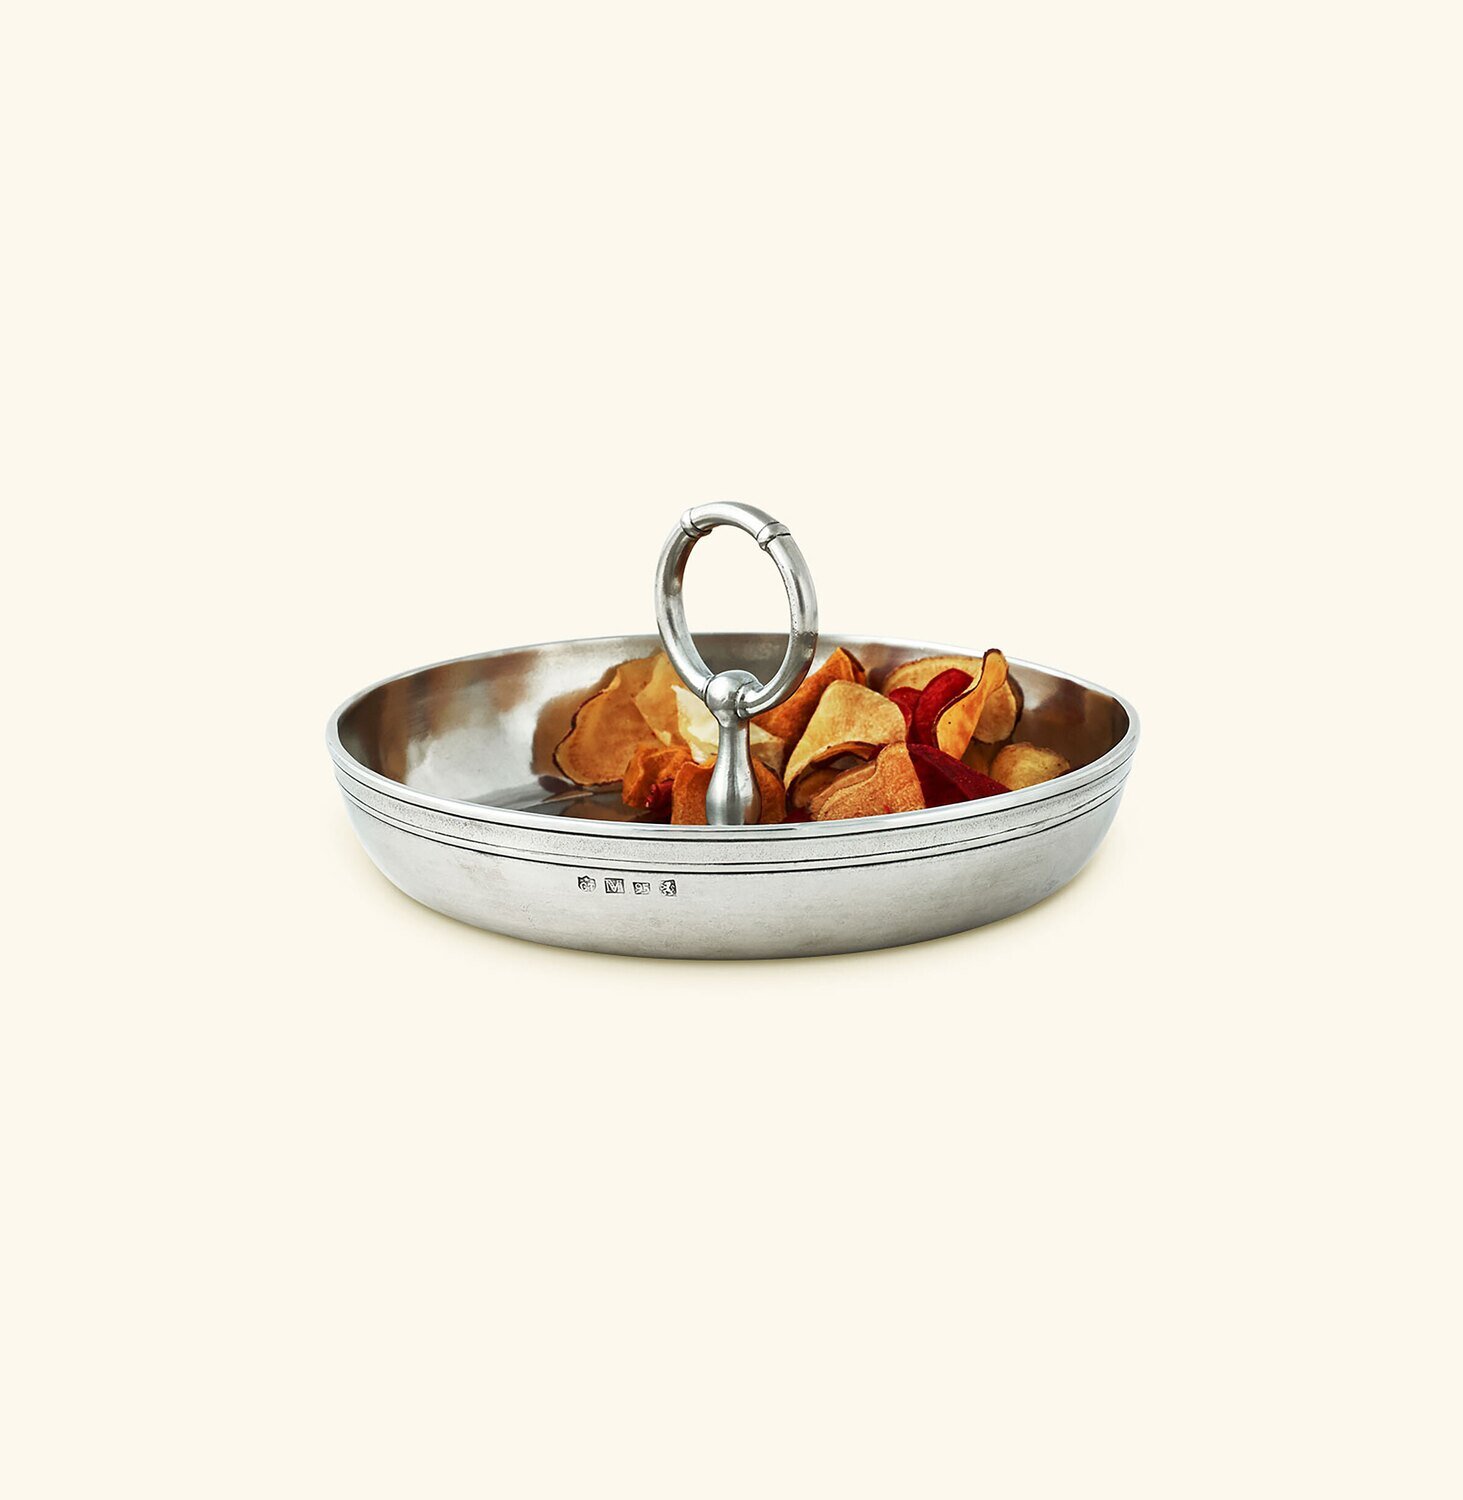 Match Pewter Festa Dish with Handle 1374